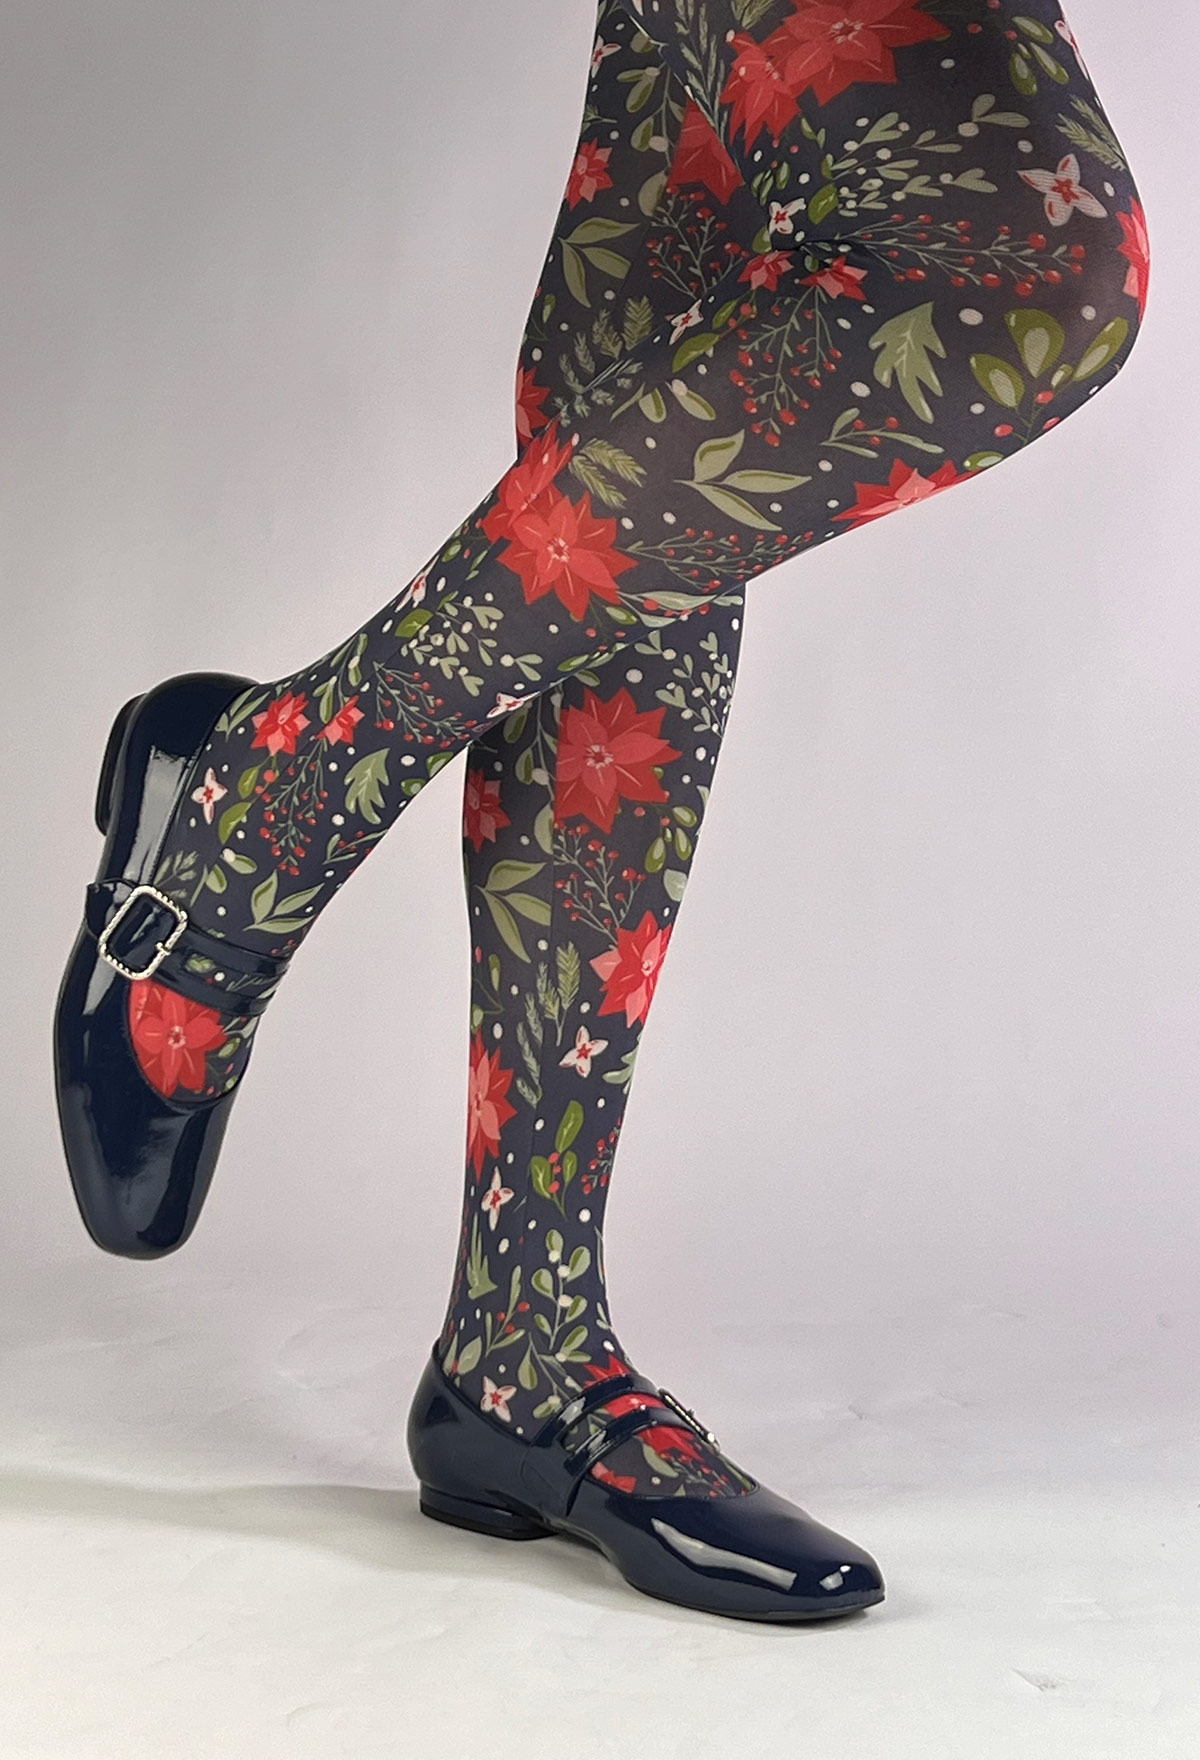 https://www.modshoes.co.uk/wp-content/uploads/2022/11/modshoes-vintage-ladies-tights-Christmas-Floral-Printed-Tighs-Multi-03.jpg